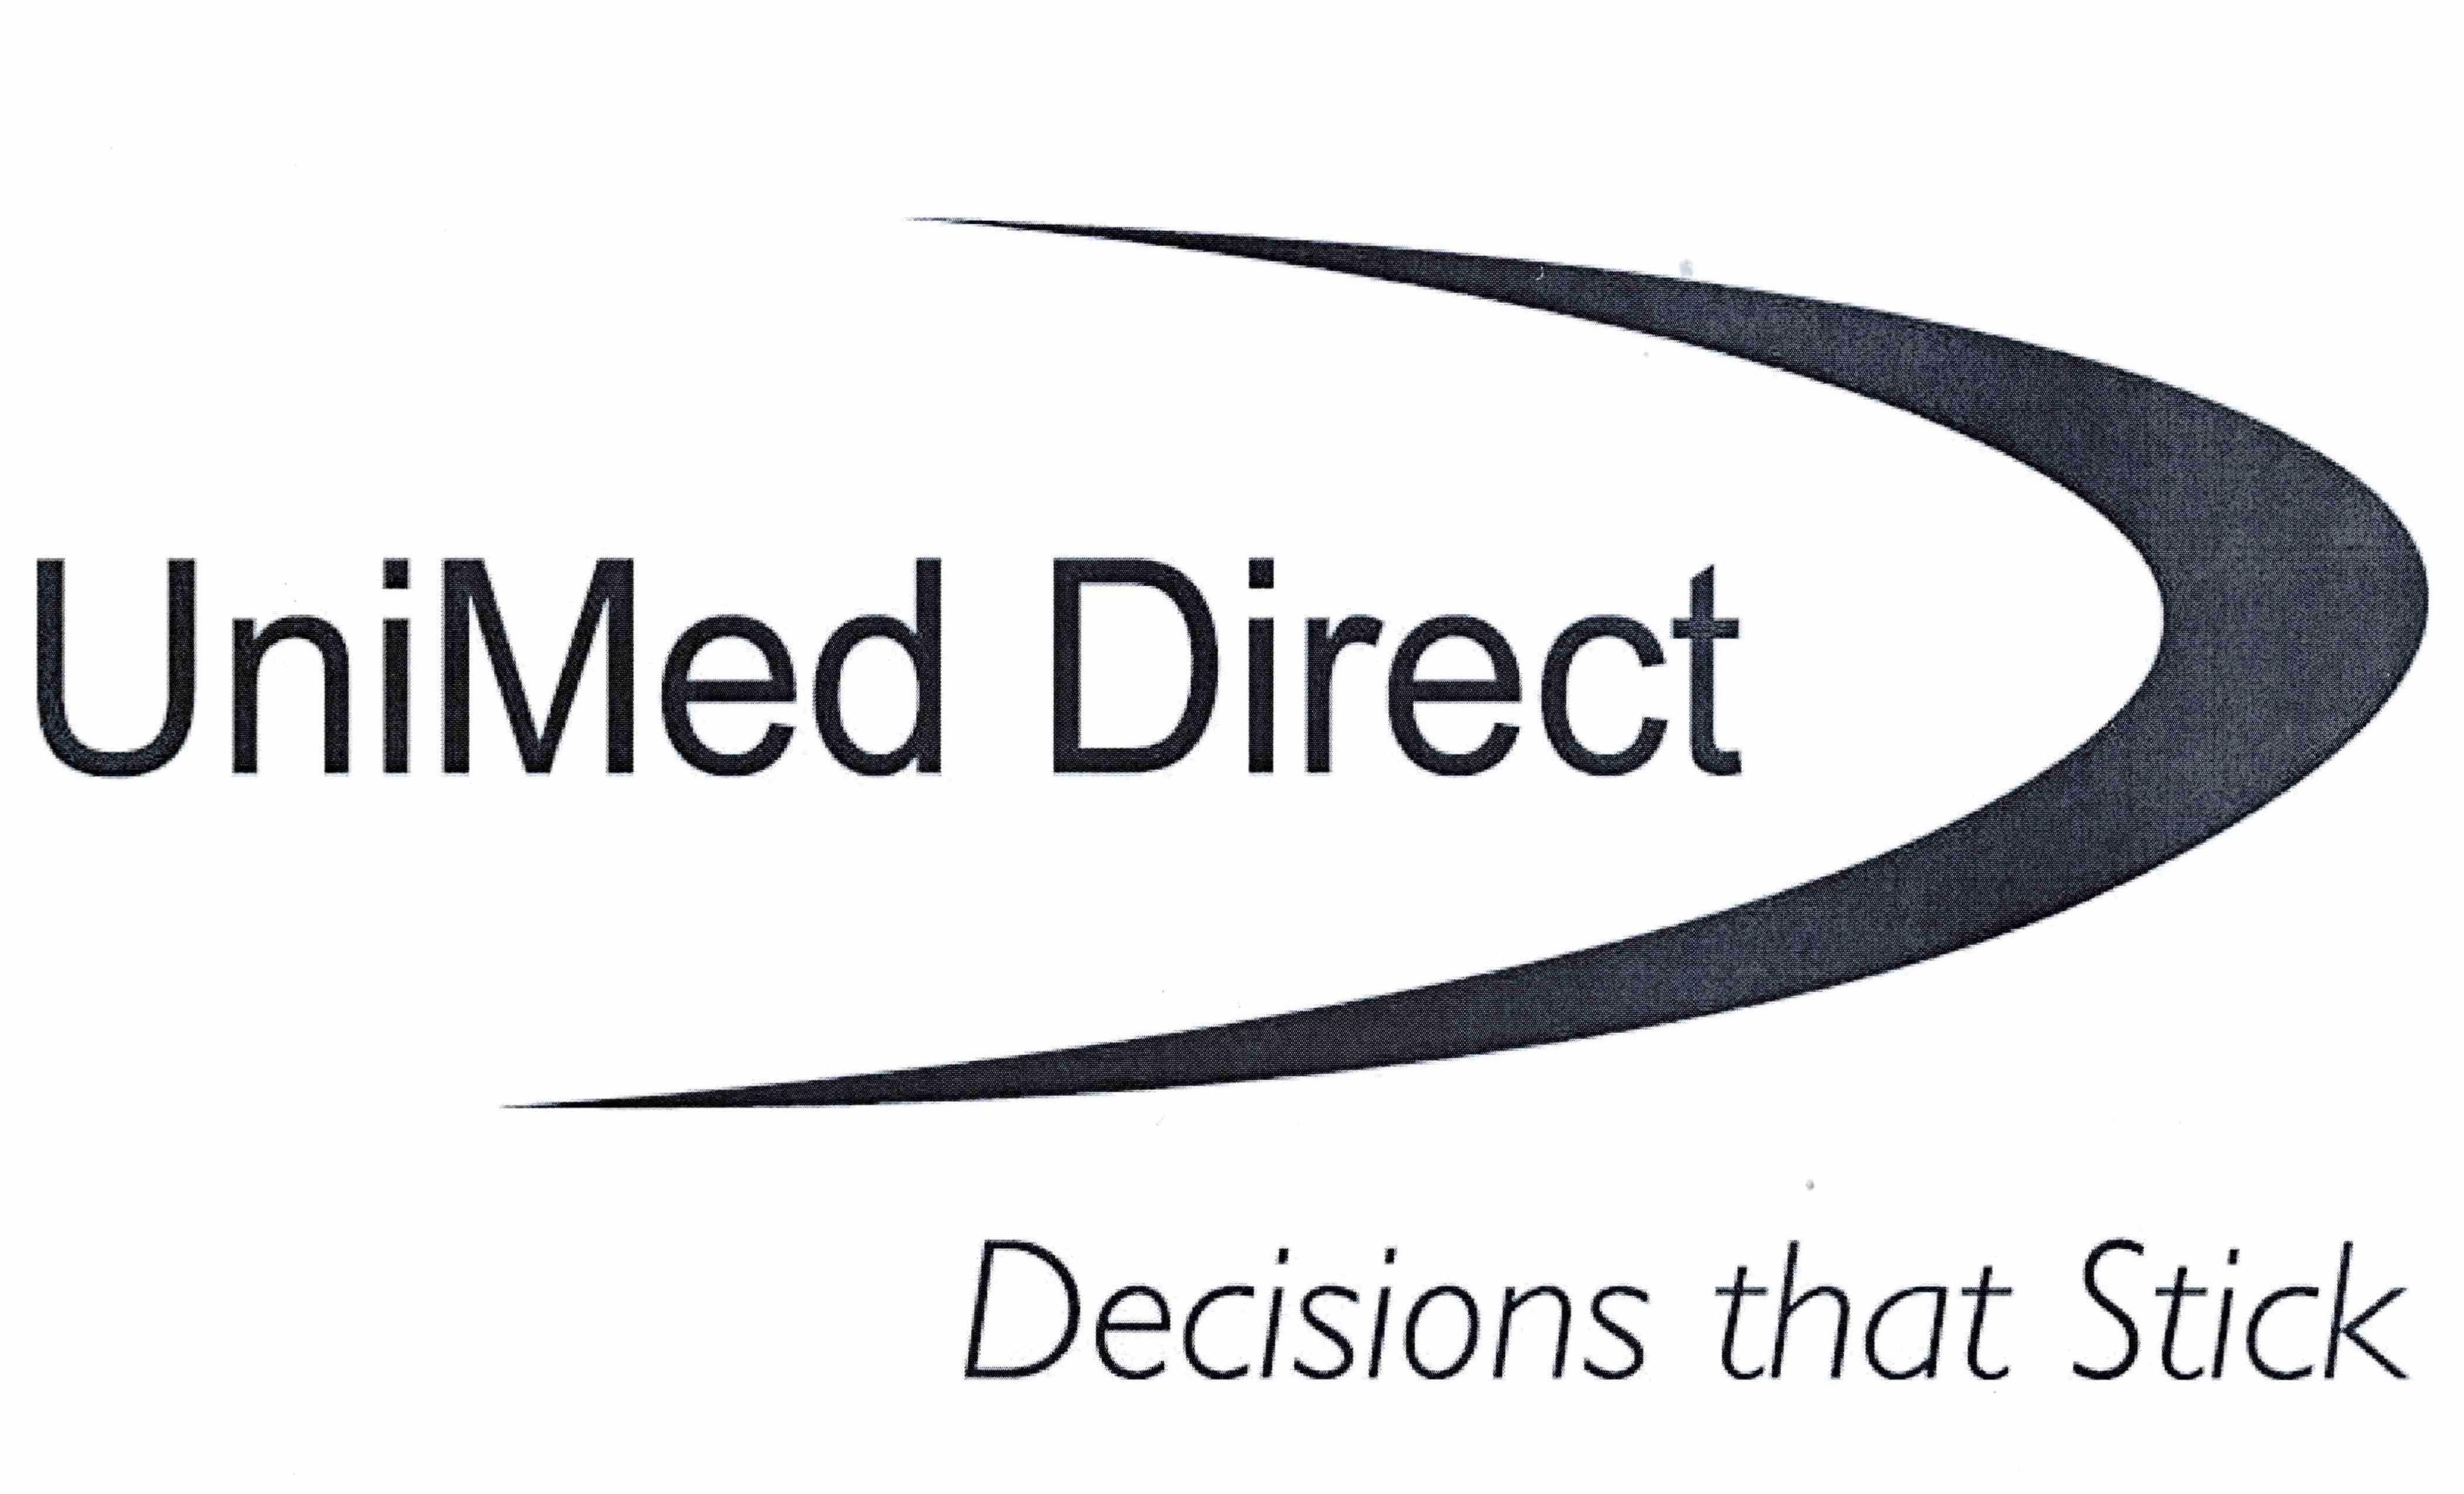  UNIMED DIRECT DECISIONS THAT STICK